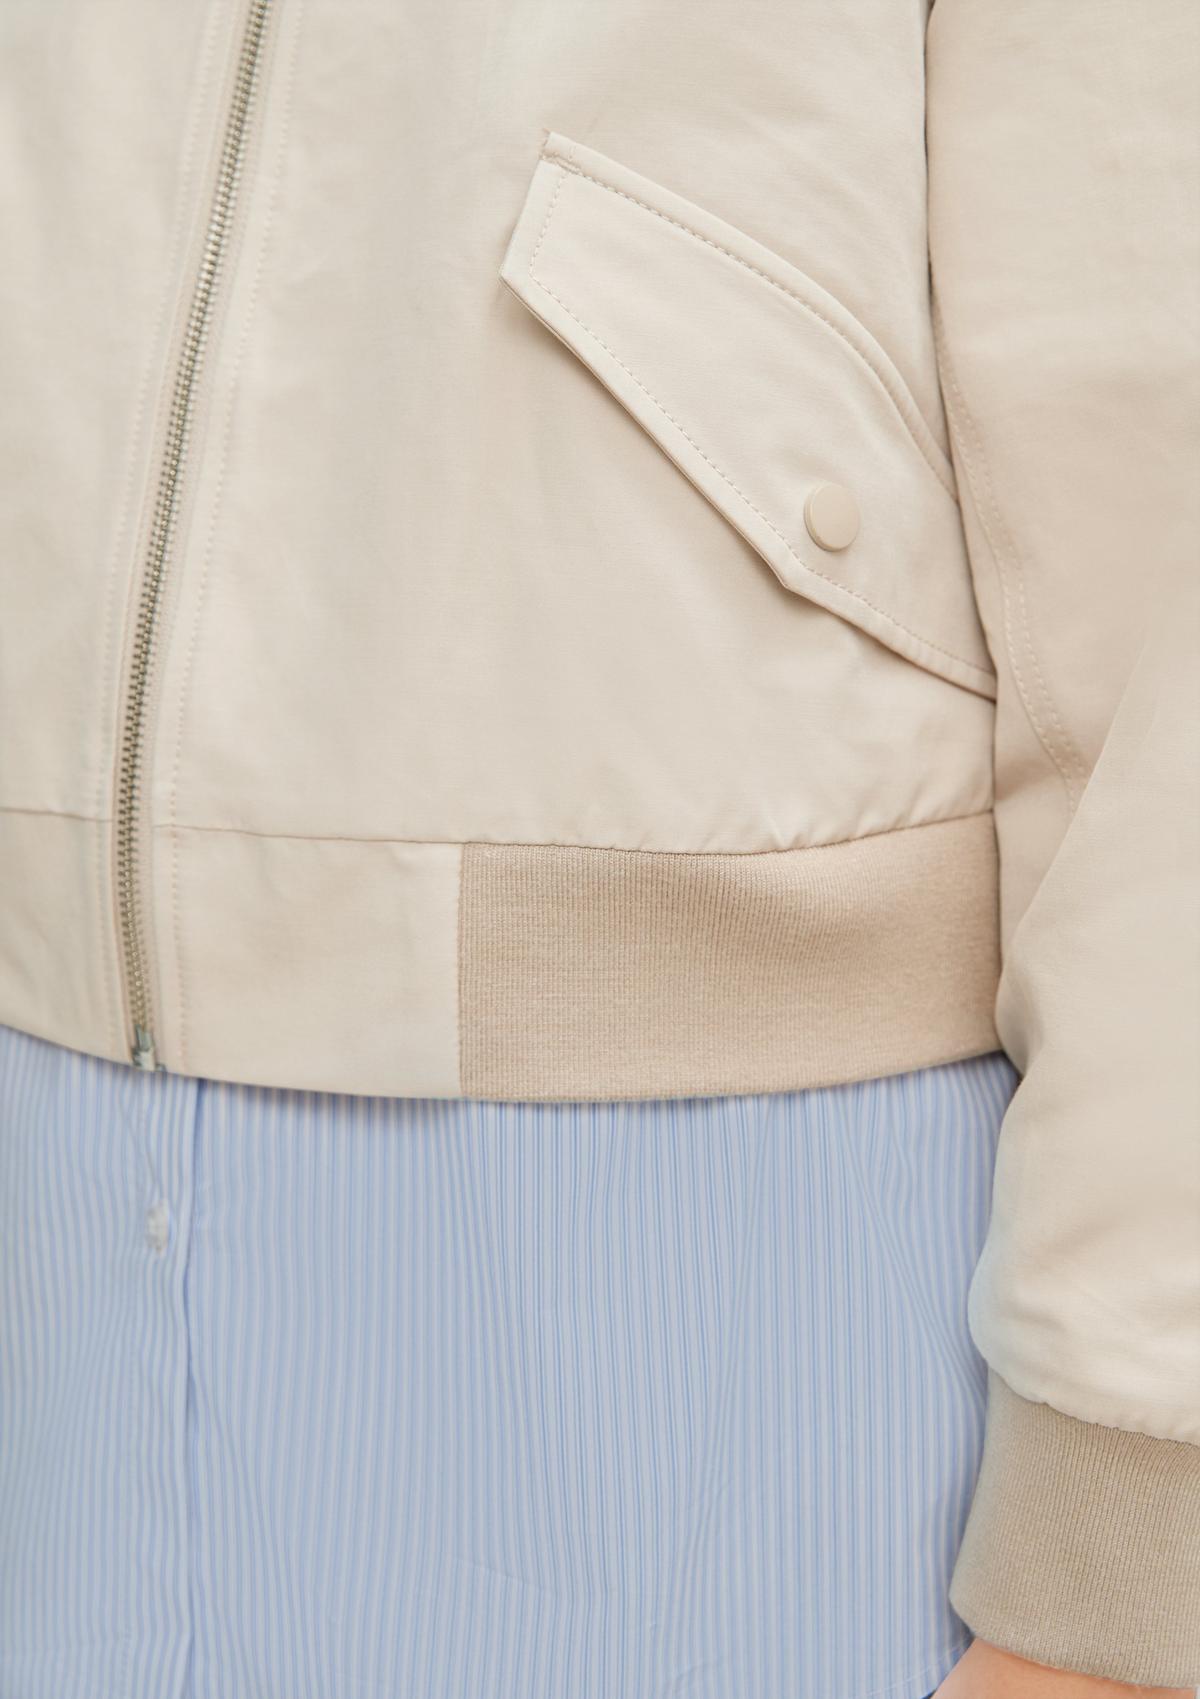 comma Bomber jacket with a blouse insert